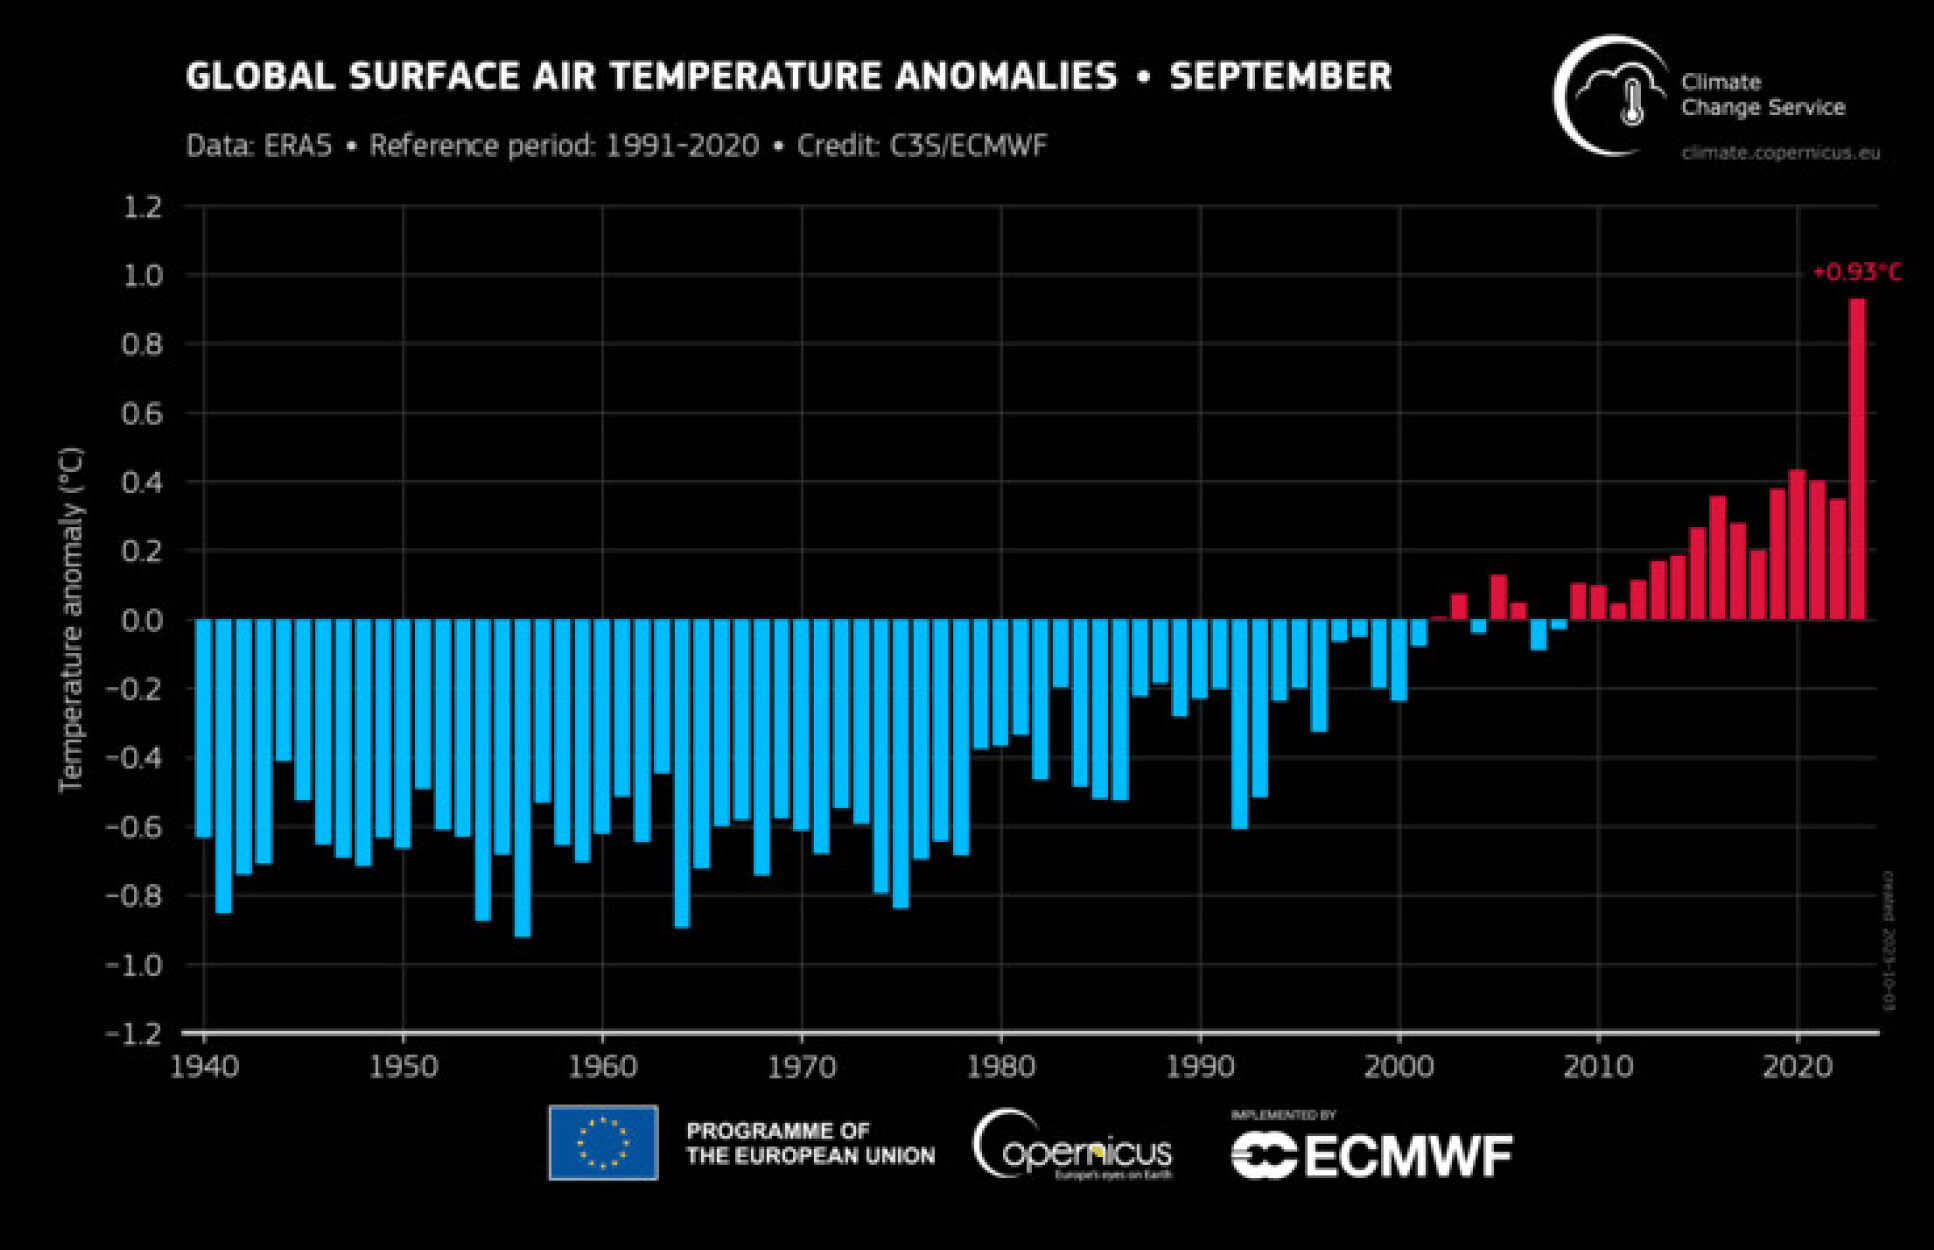 A graph showing annual global surface air temperature anomalies for September from 1940 to 2023